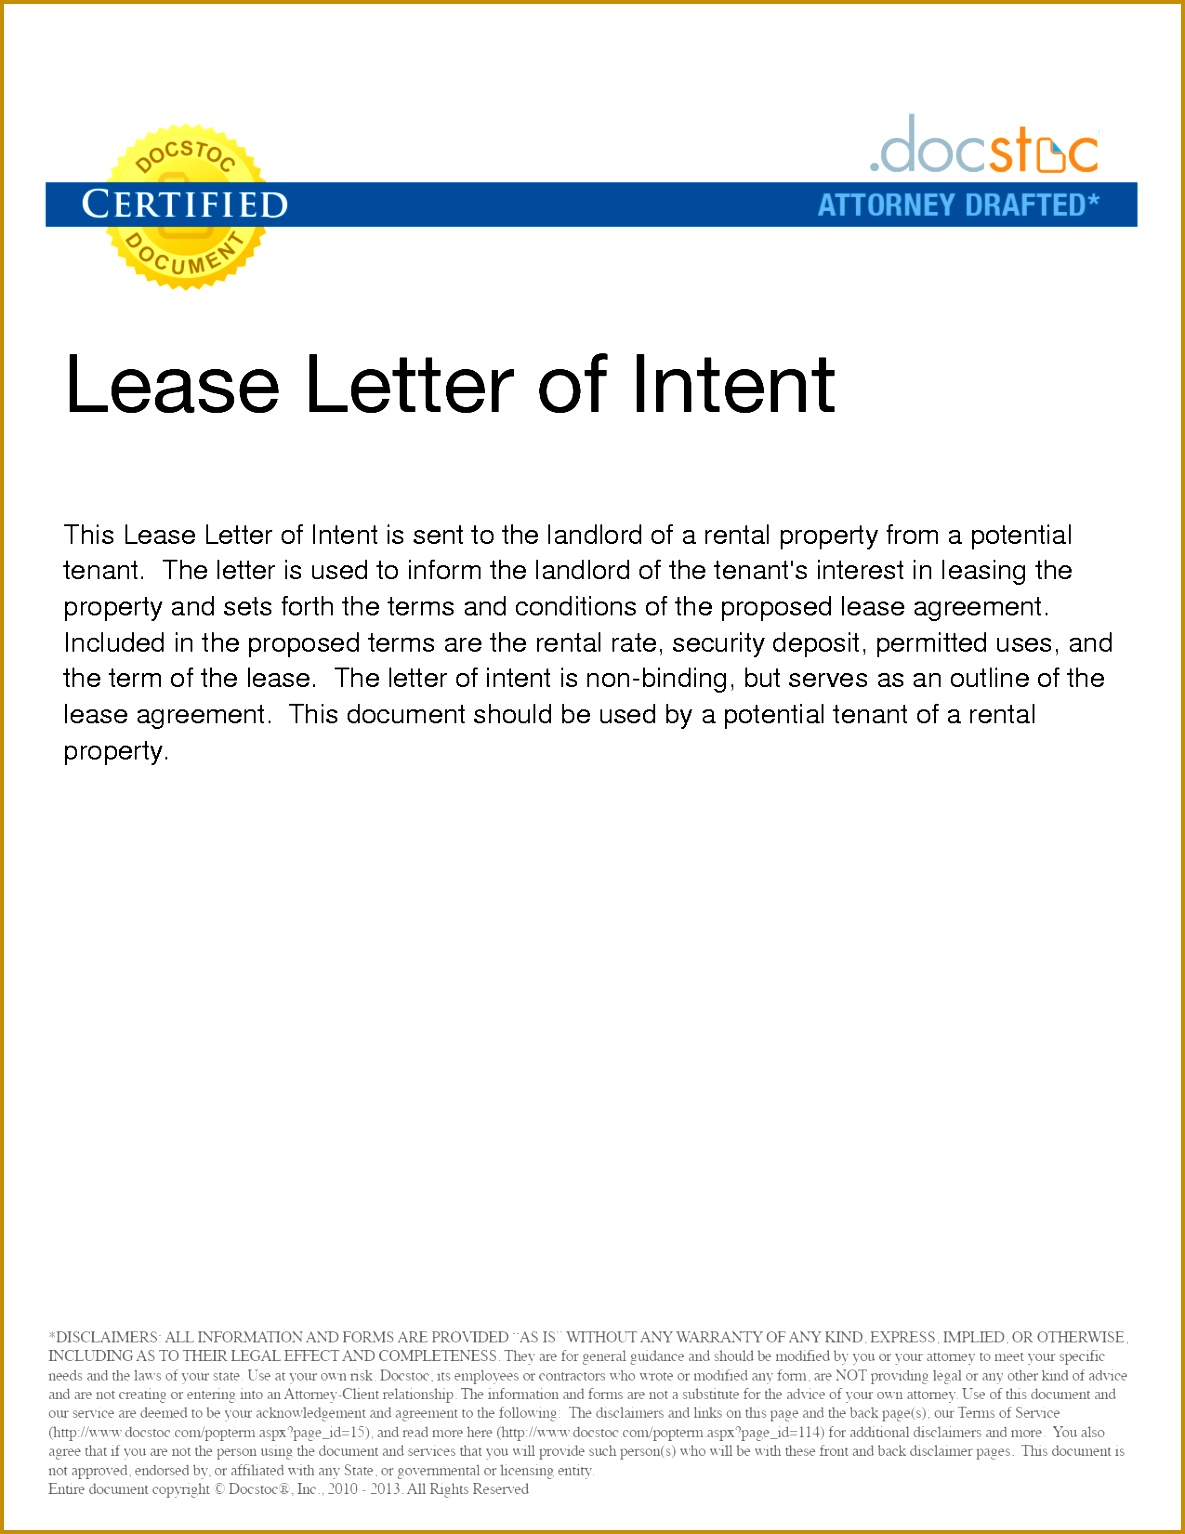 Sample Letter of Intent Lease 15341185